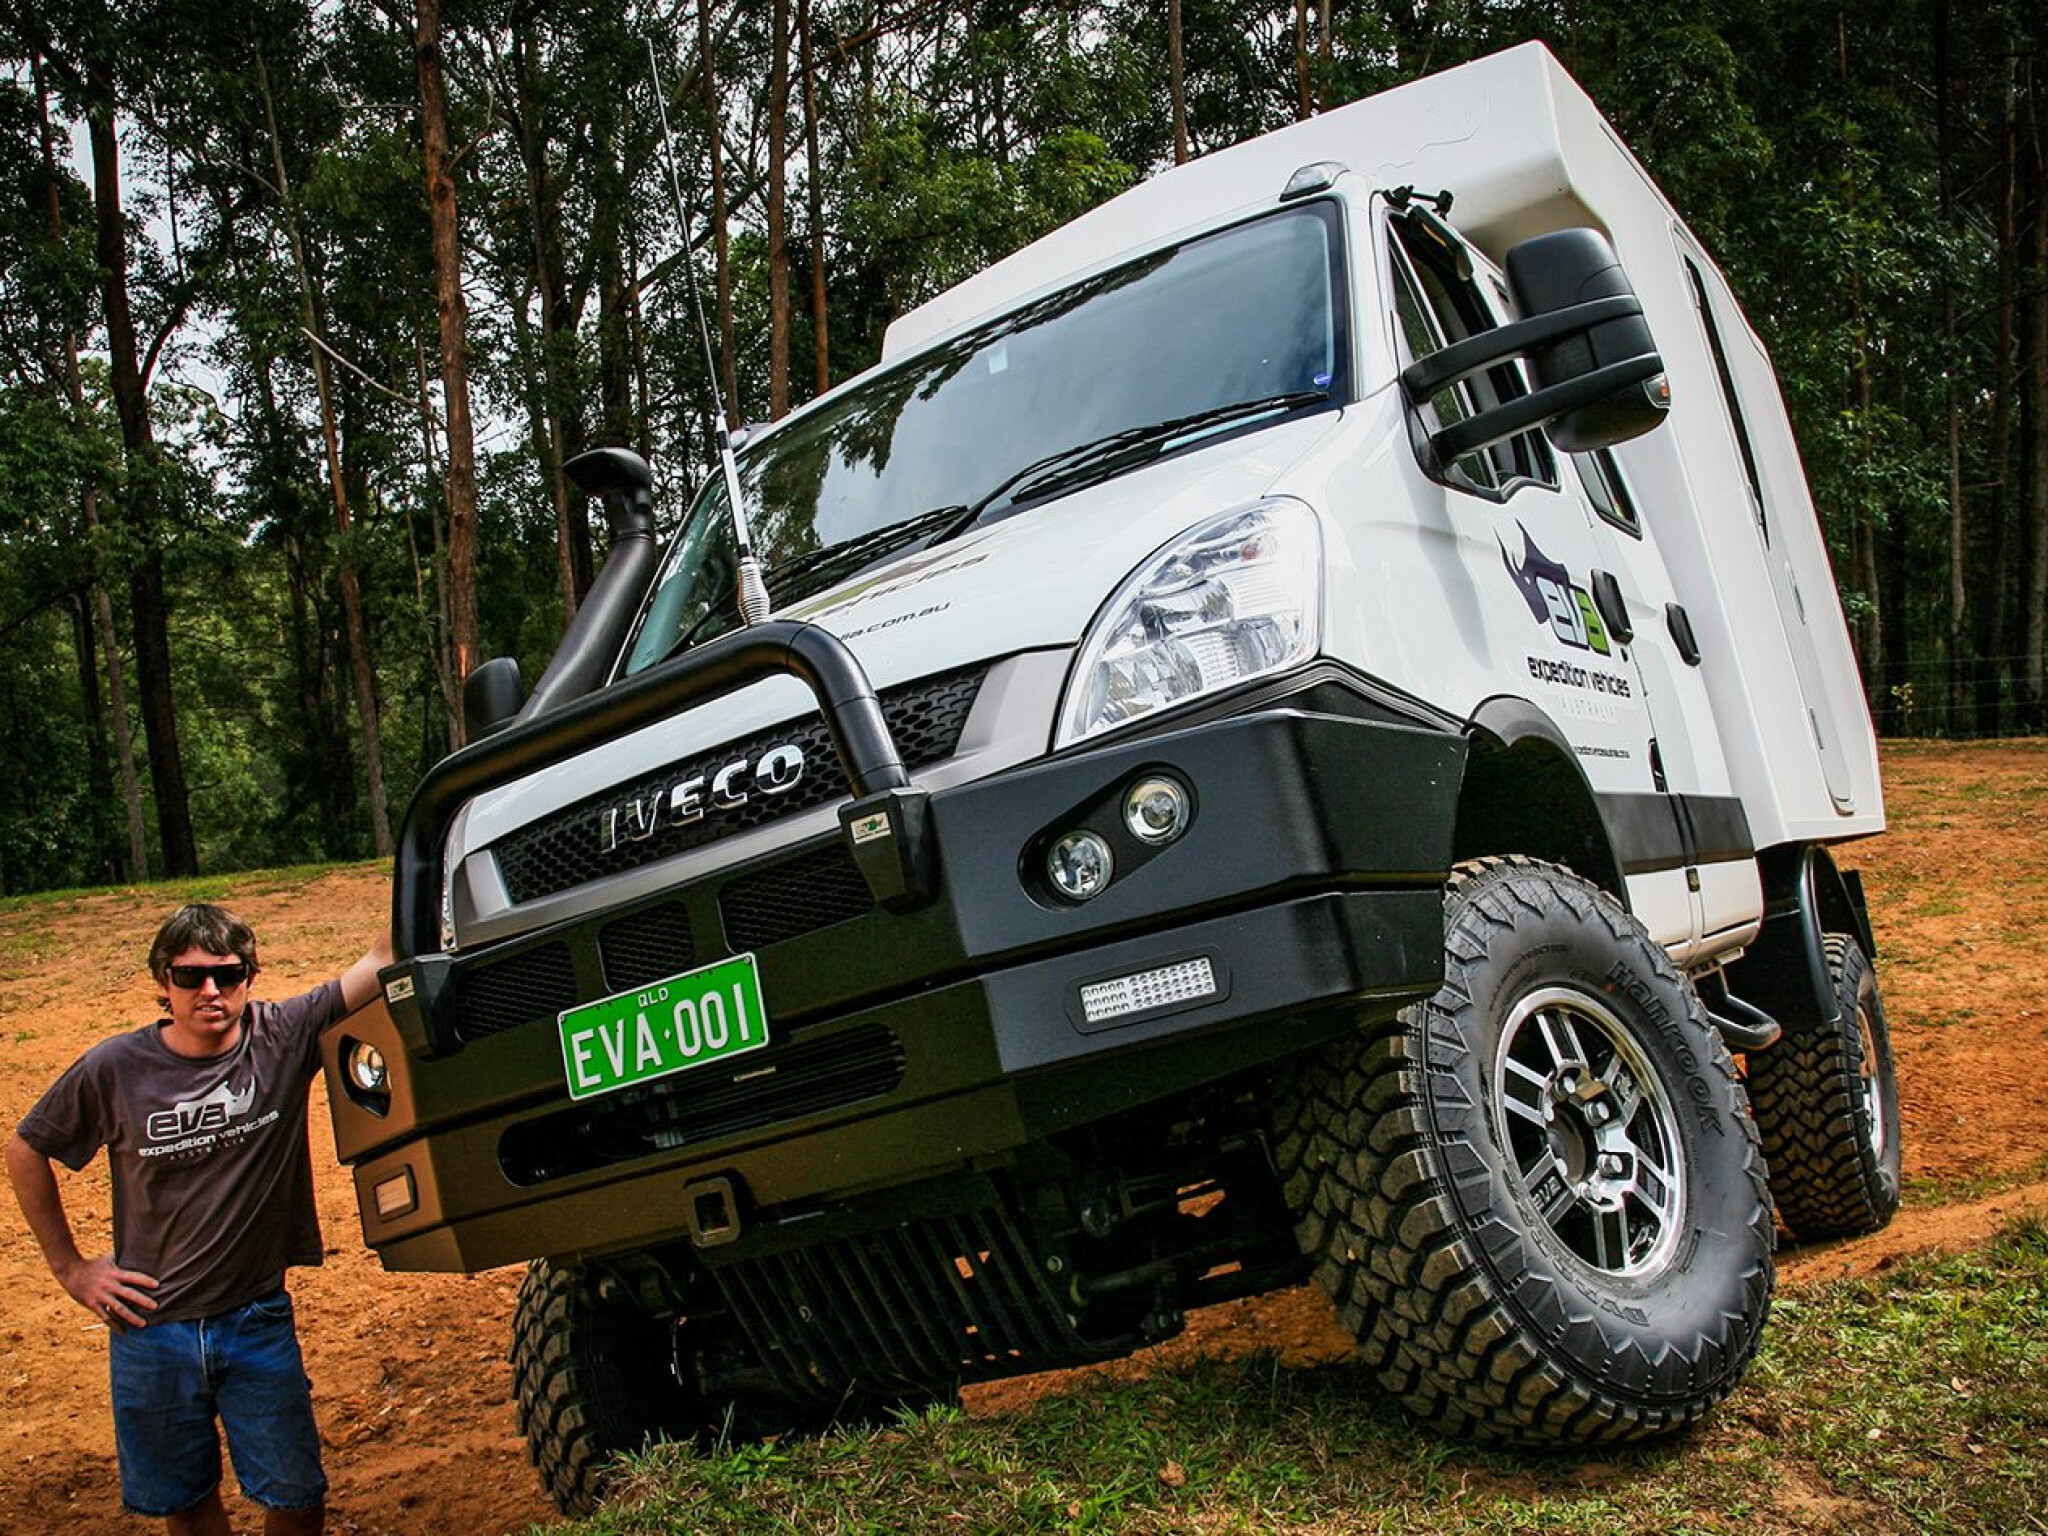 Offroad daily - 4x4 accessories